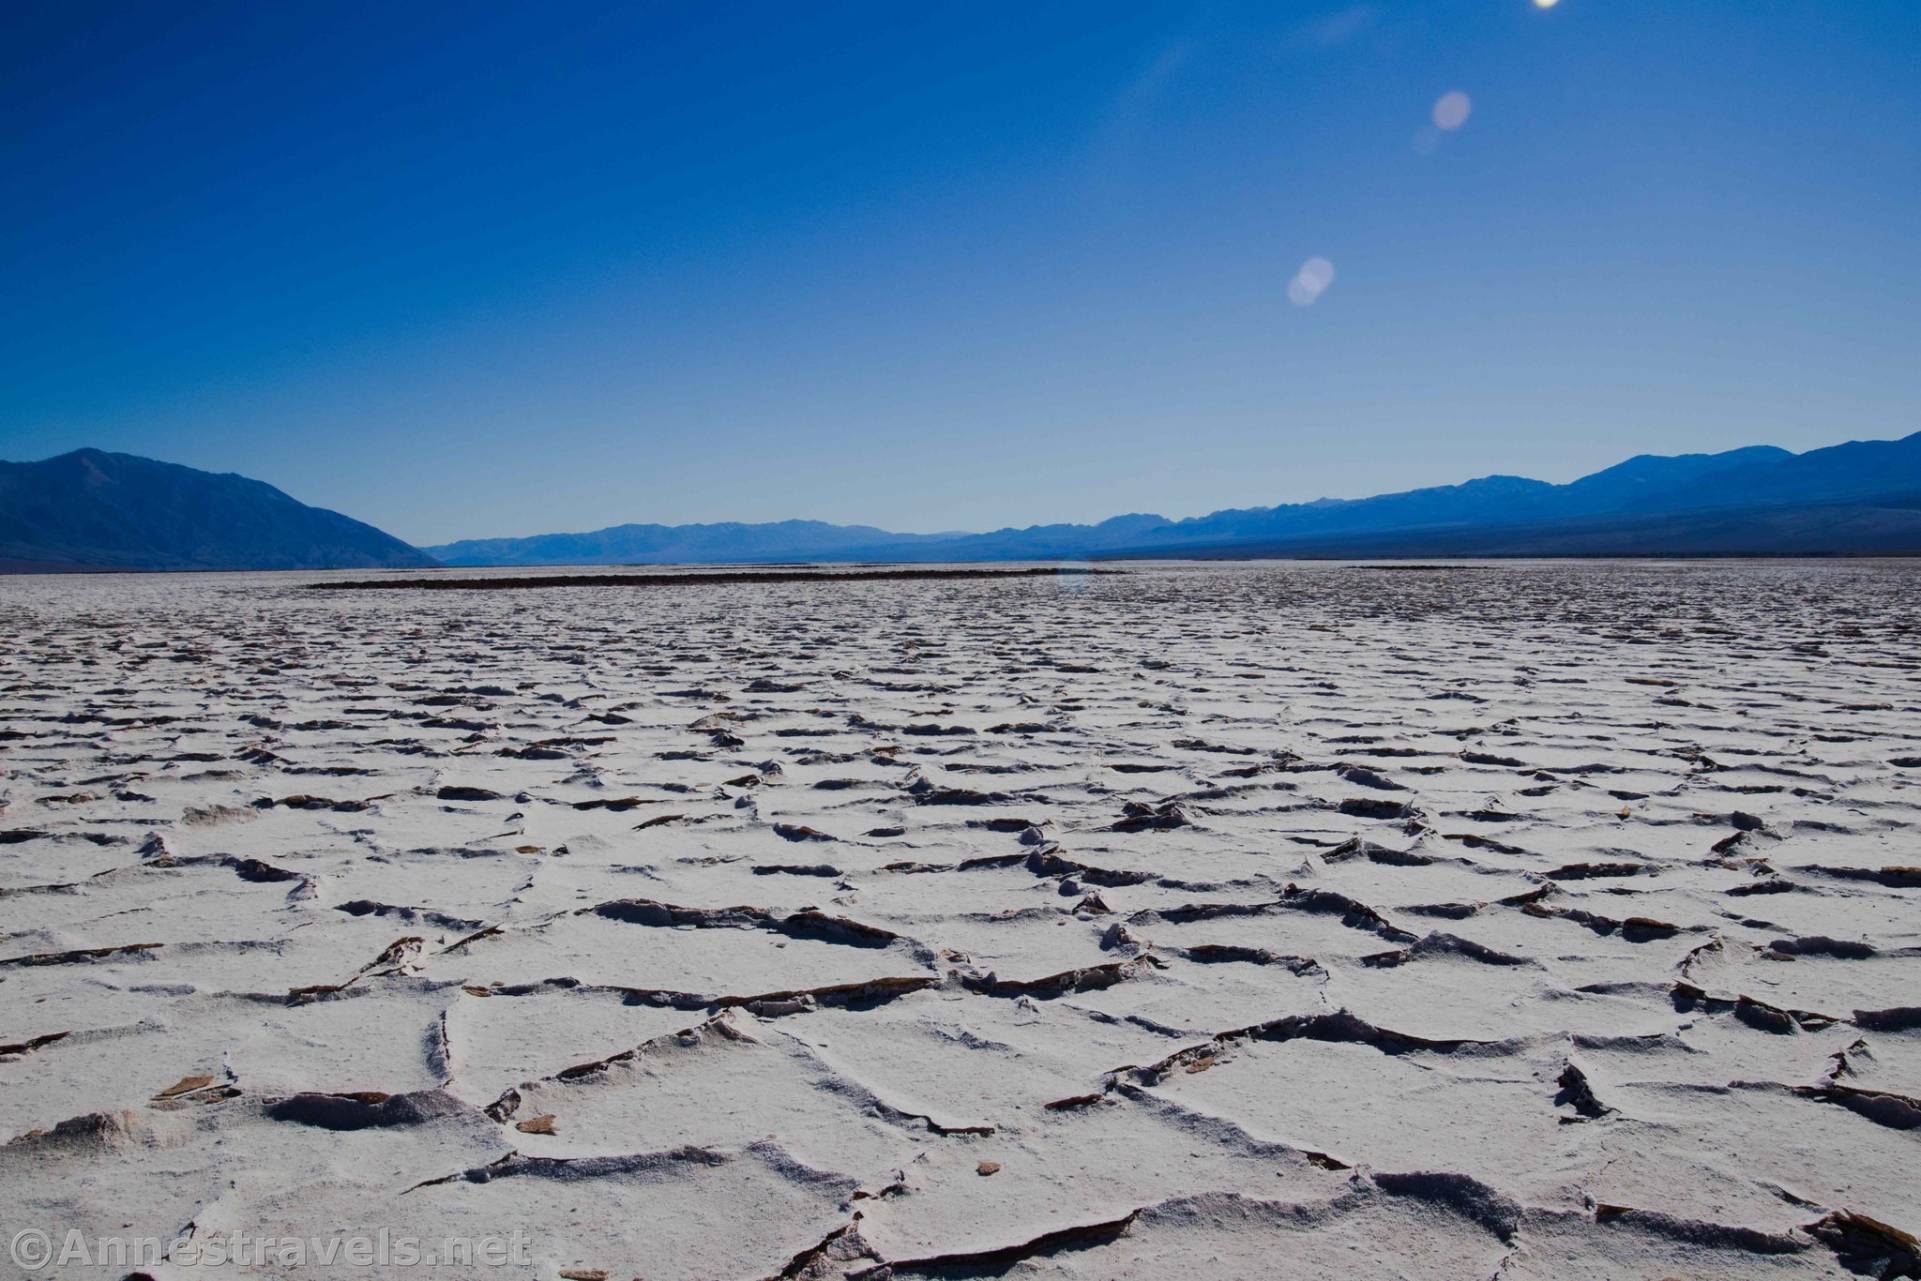 Views south on Badwater Flats, Death Valley National Park, California